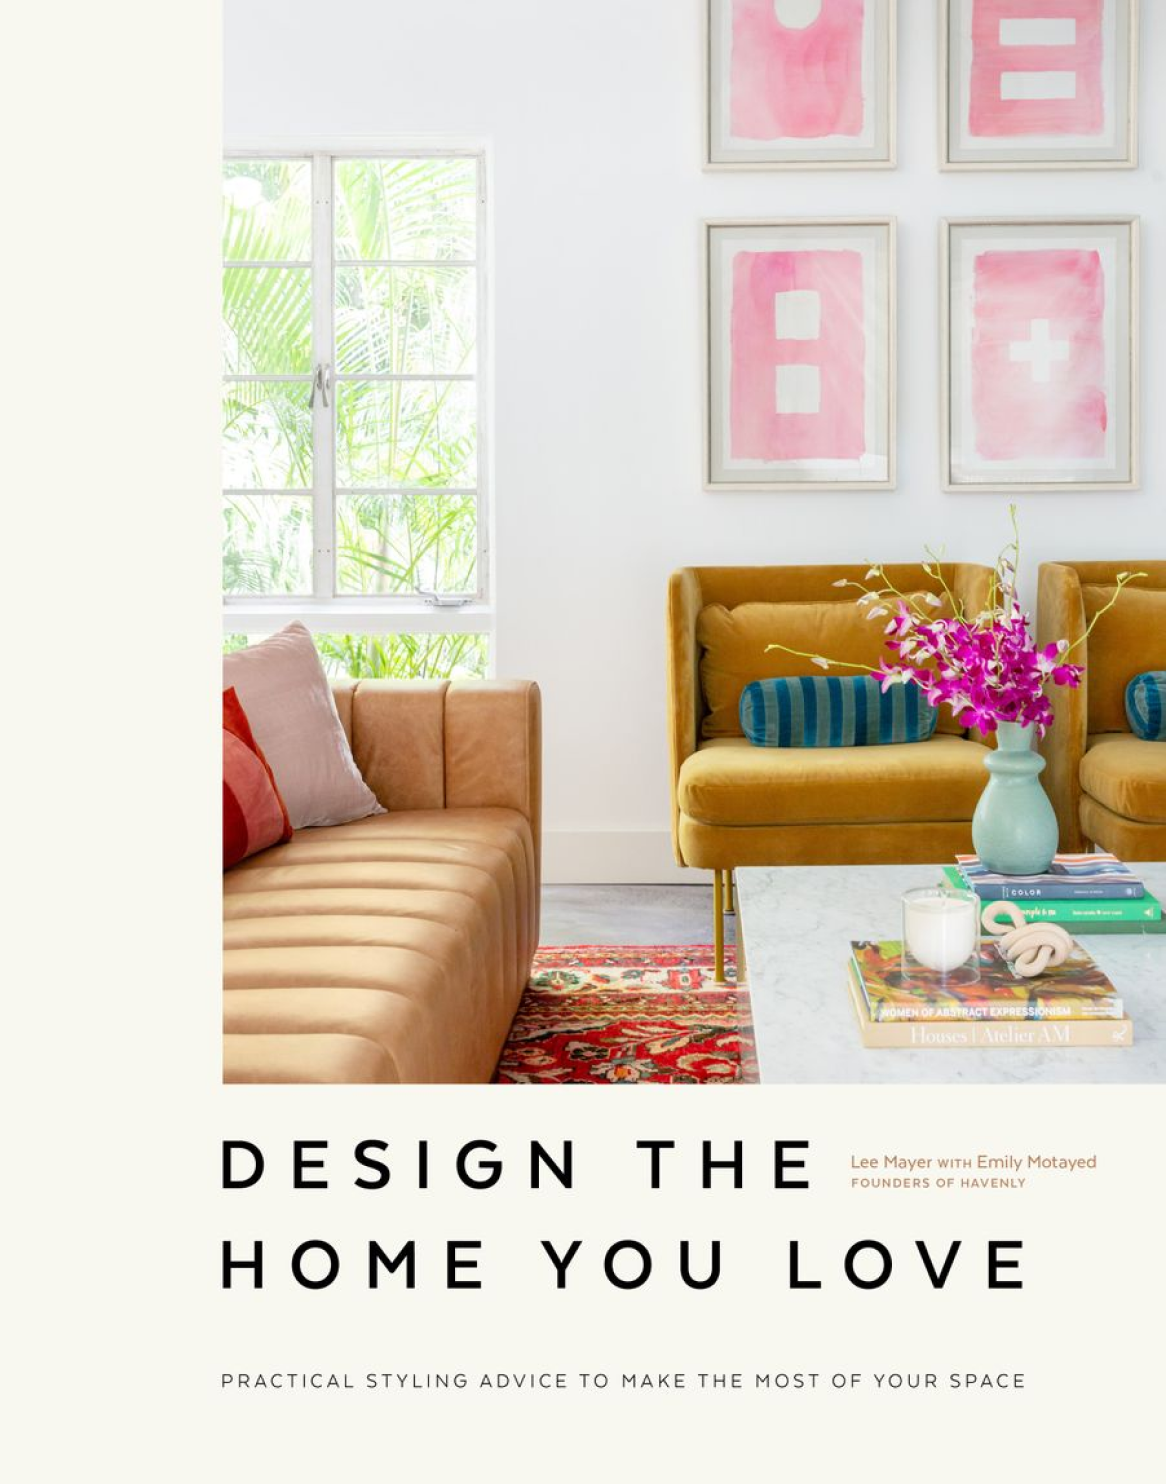 Design the home you love